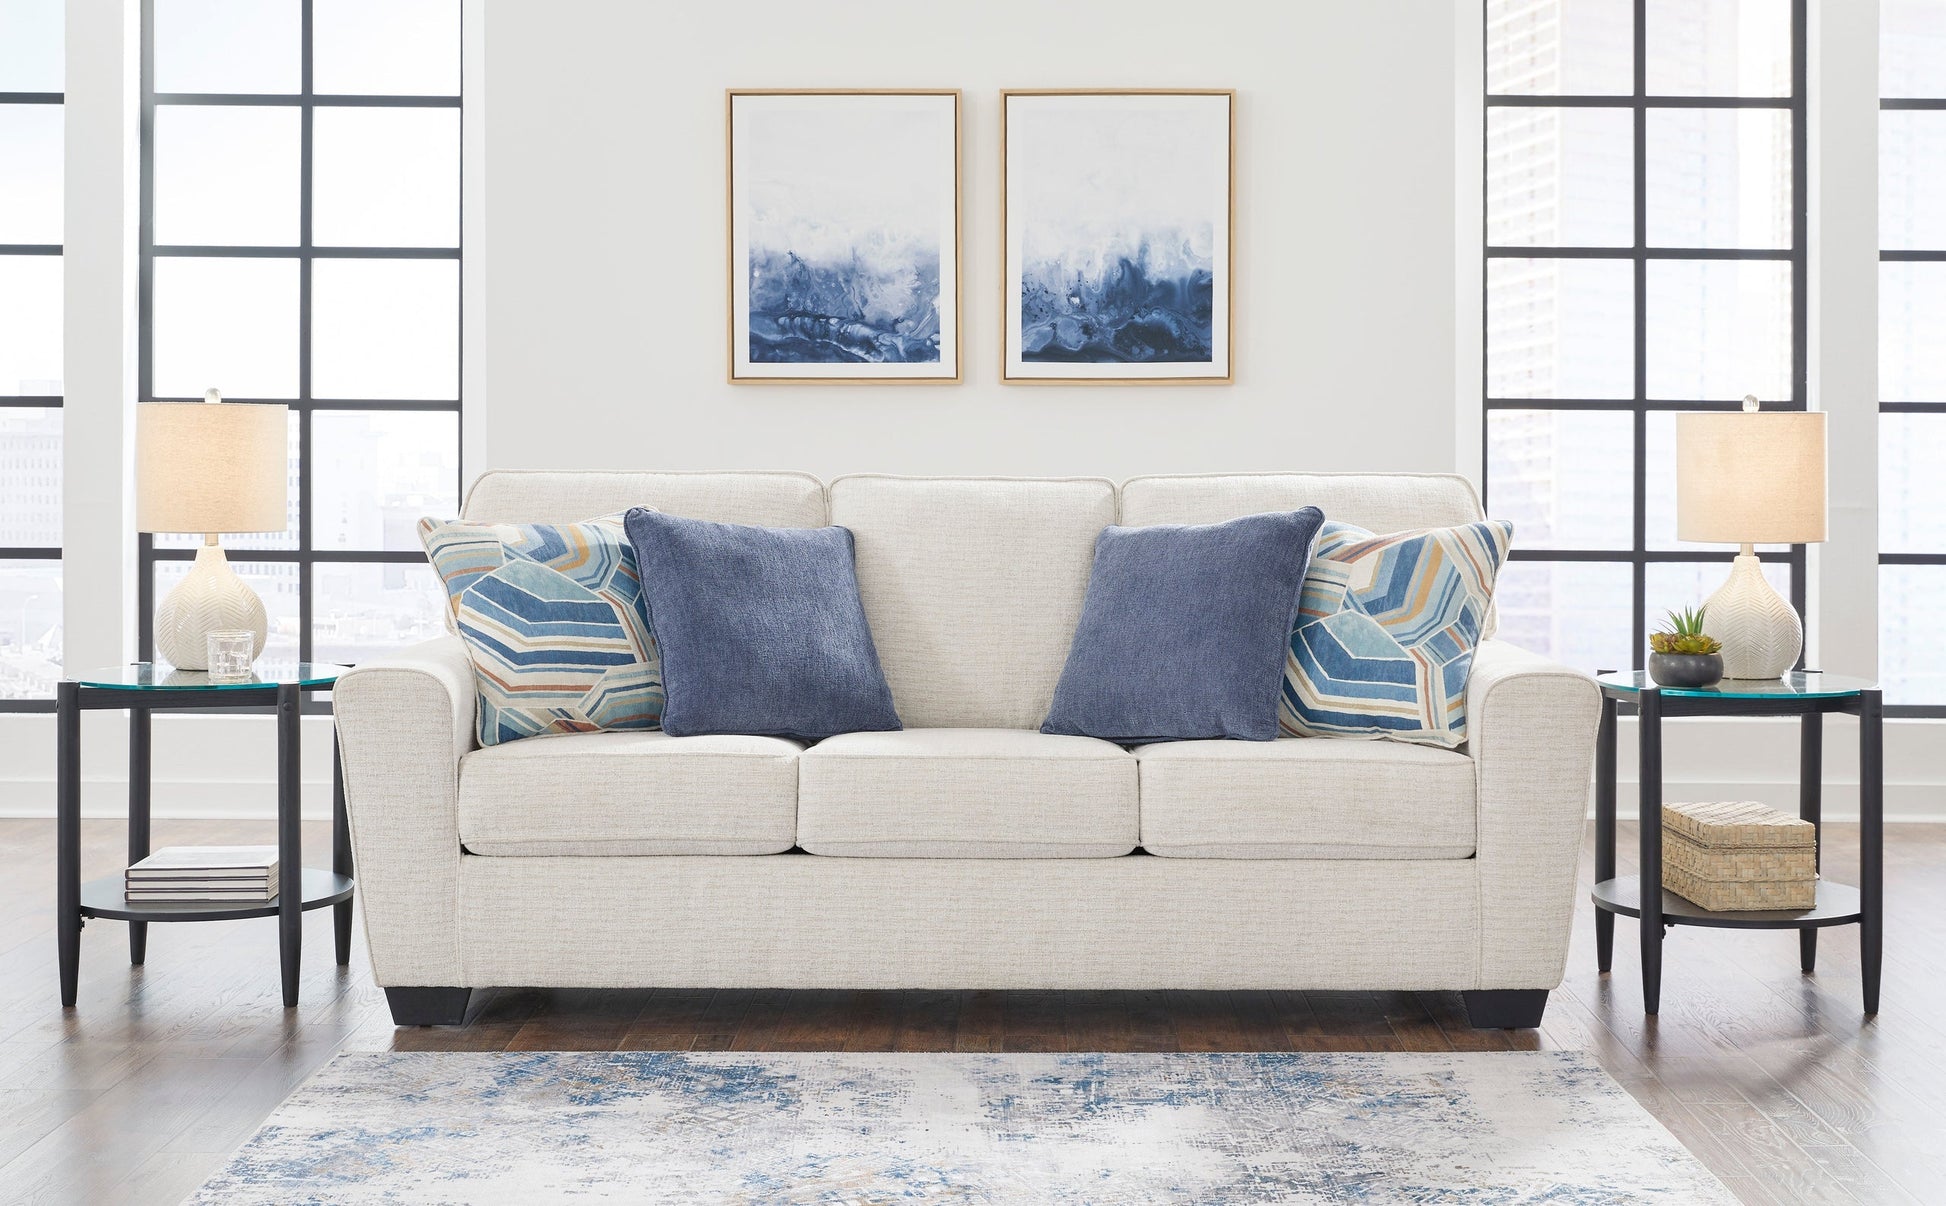 Ashley Snow Modern Contemporary Solid Wood Fabric Upholstered Sofa & Loveseat